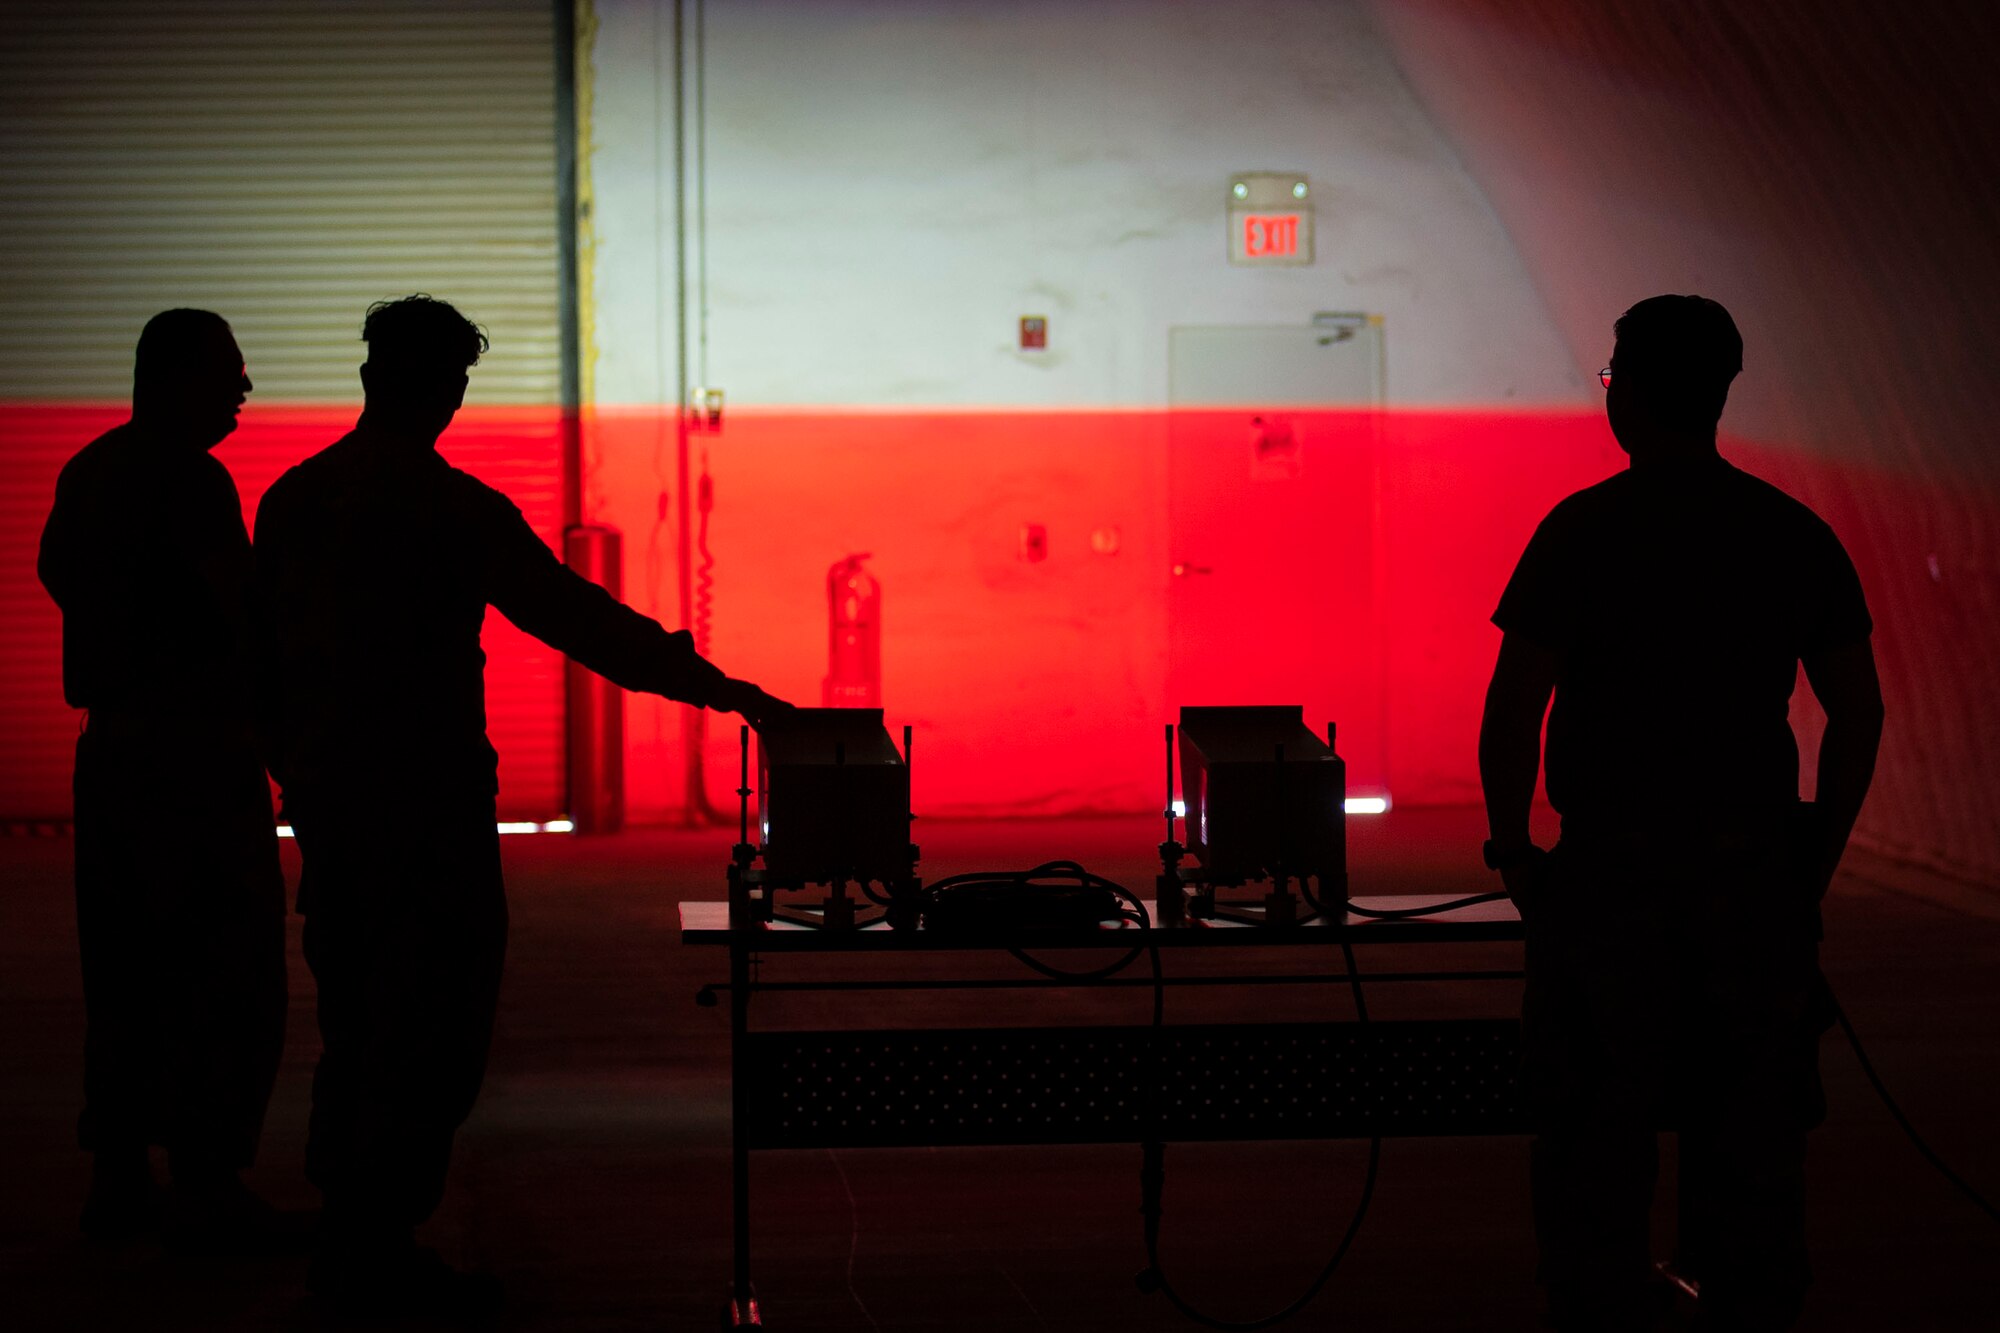 Airmen from the 635th Materiel Maintenance Squadron and the 1st Special Operations Civil Engineer Squadron test out the lighting for an Expeditionary Aircraft Lighting System during a training course at Holloman Air force Base, New Mexico, Dec. 14, 2023. The new EALS lighting system plays a key role in providing deployed environments with quick and reliable landing zones for a variety of aircraft. (U.S. Air Force photo by Airman 1st Class Isaiah Pedrazzini)